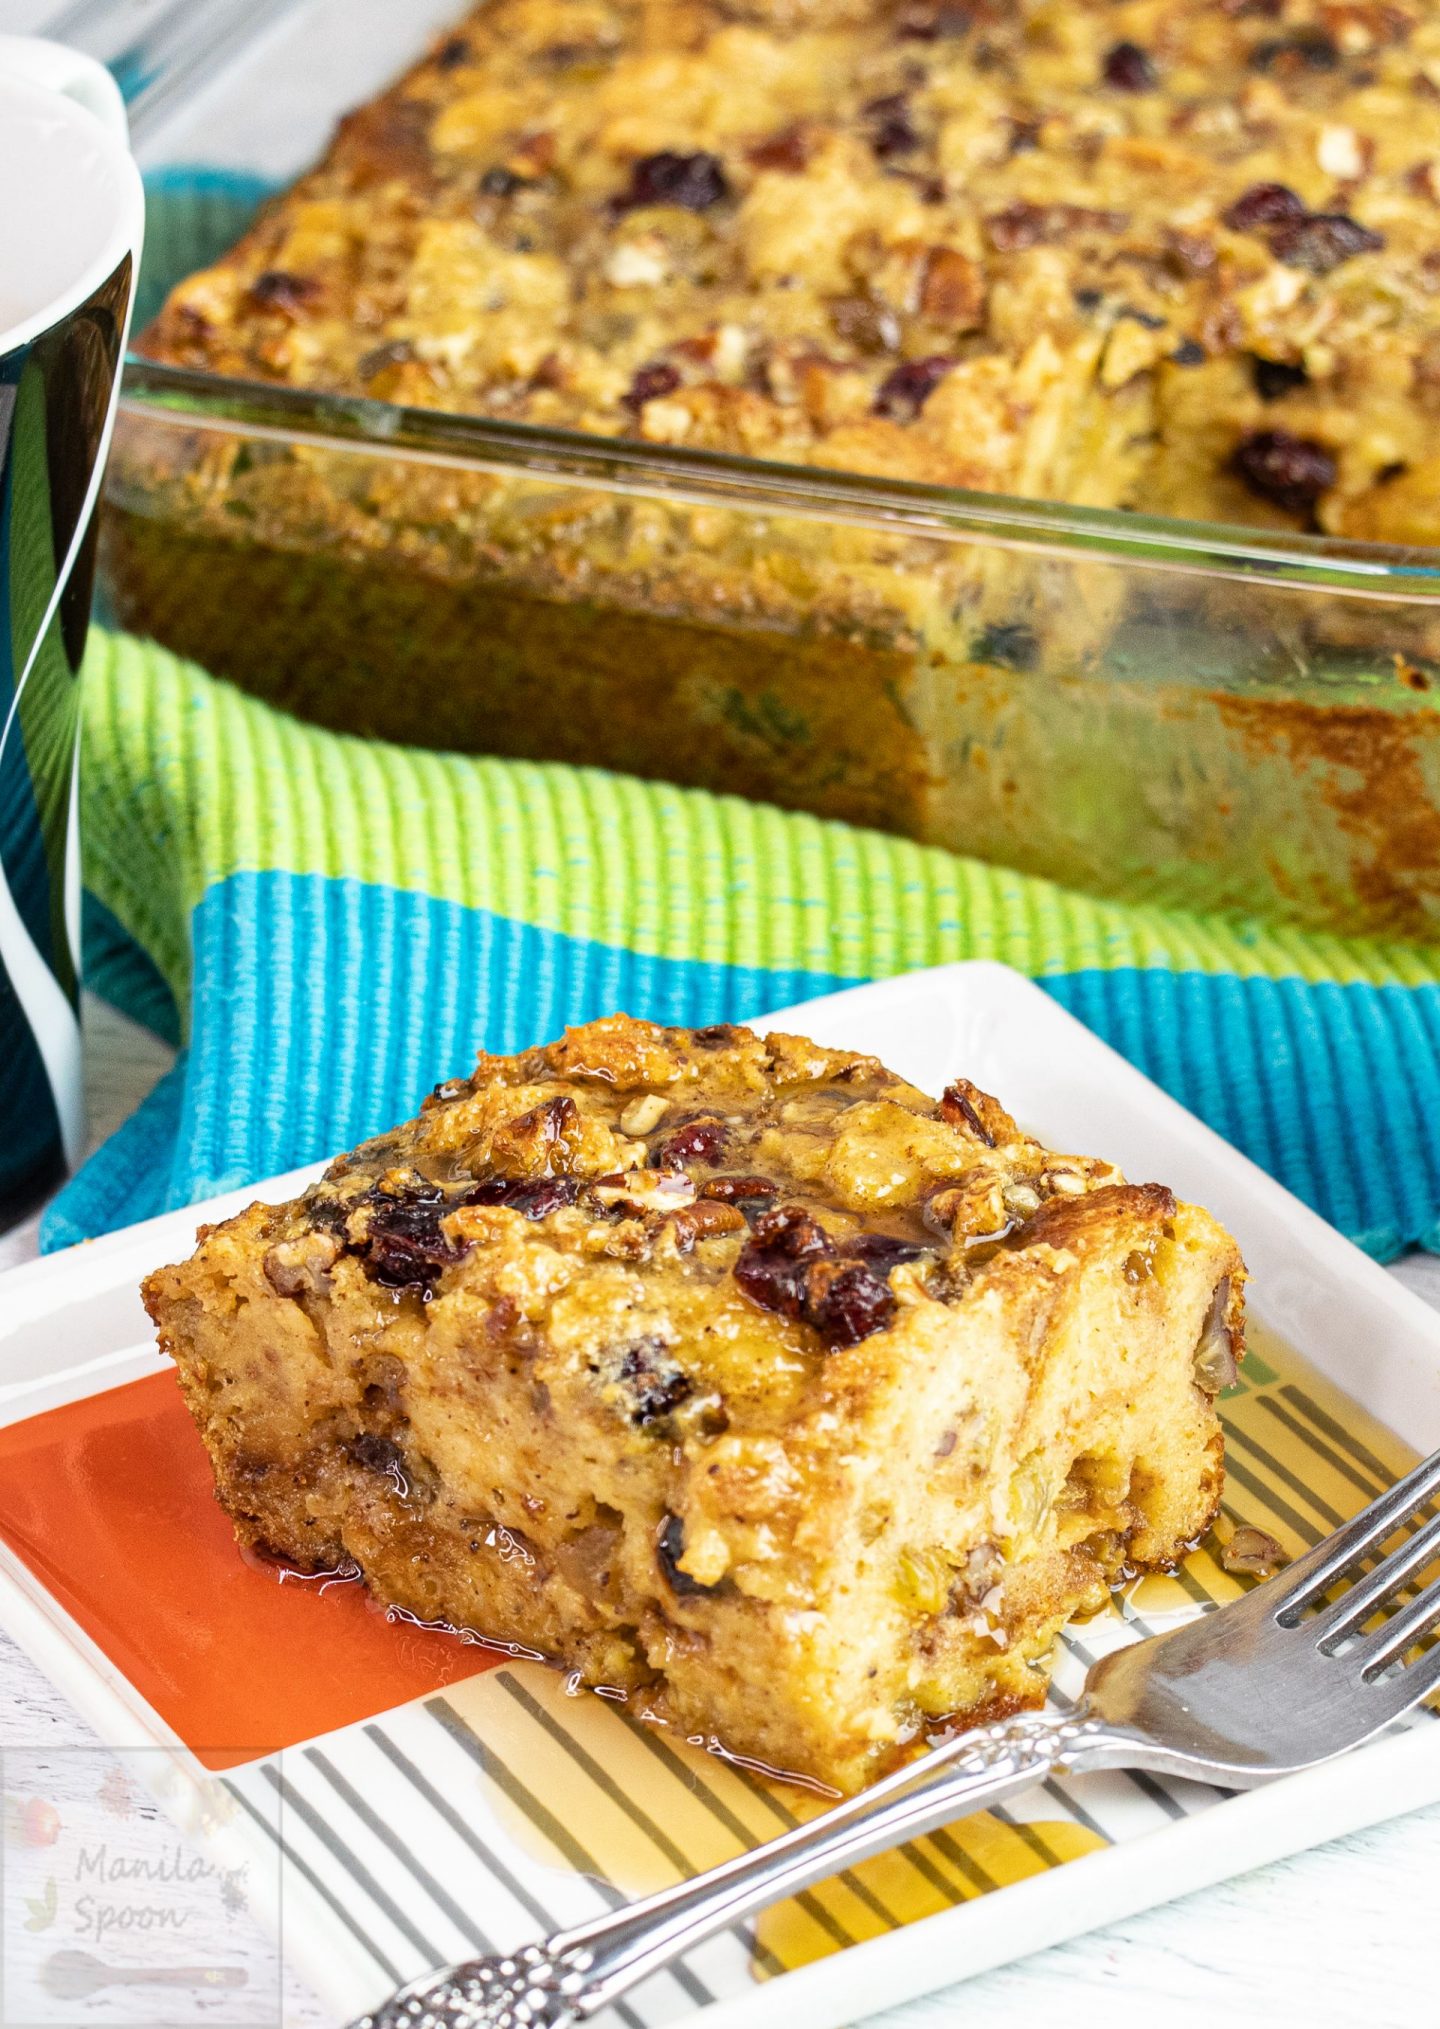 Set aside your usual bread and butter pudding and make this delectable version made with panettone (rich Italian bread), seasoned with aromatic spices then laden with fruits and nuts.